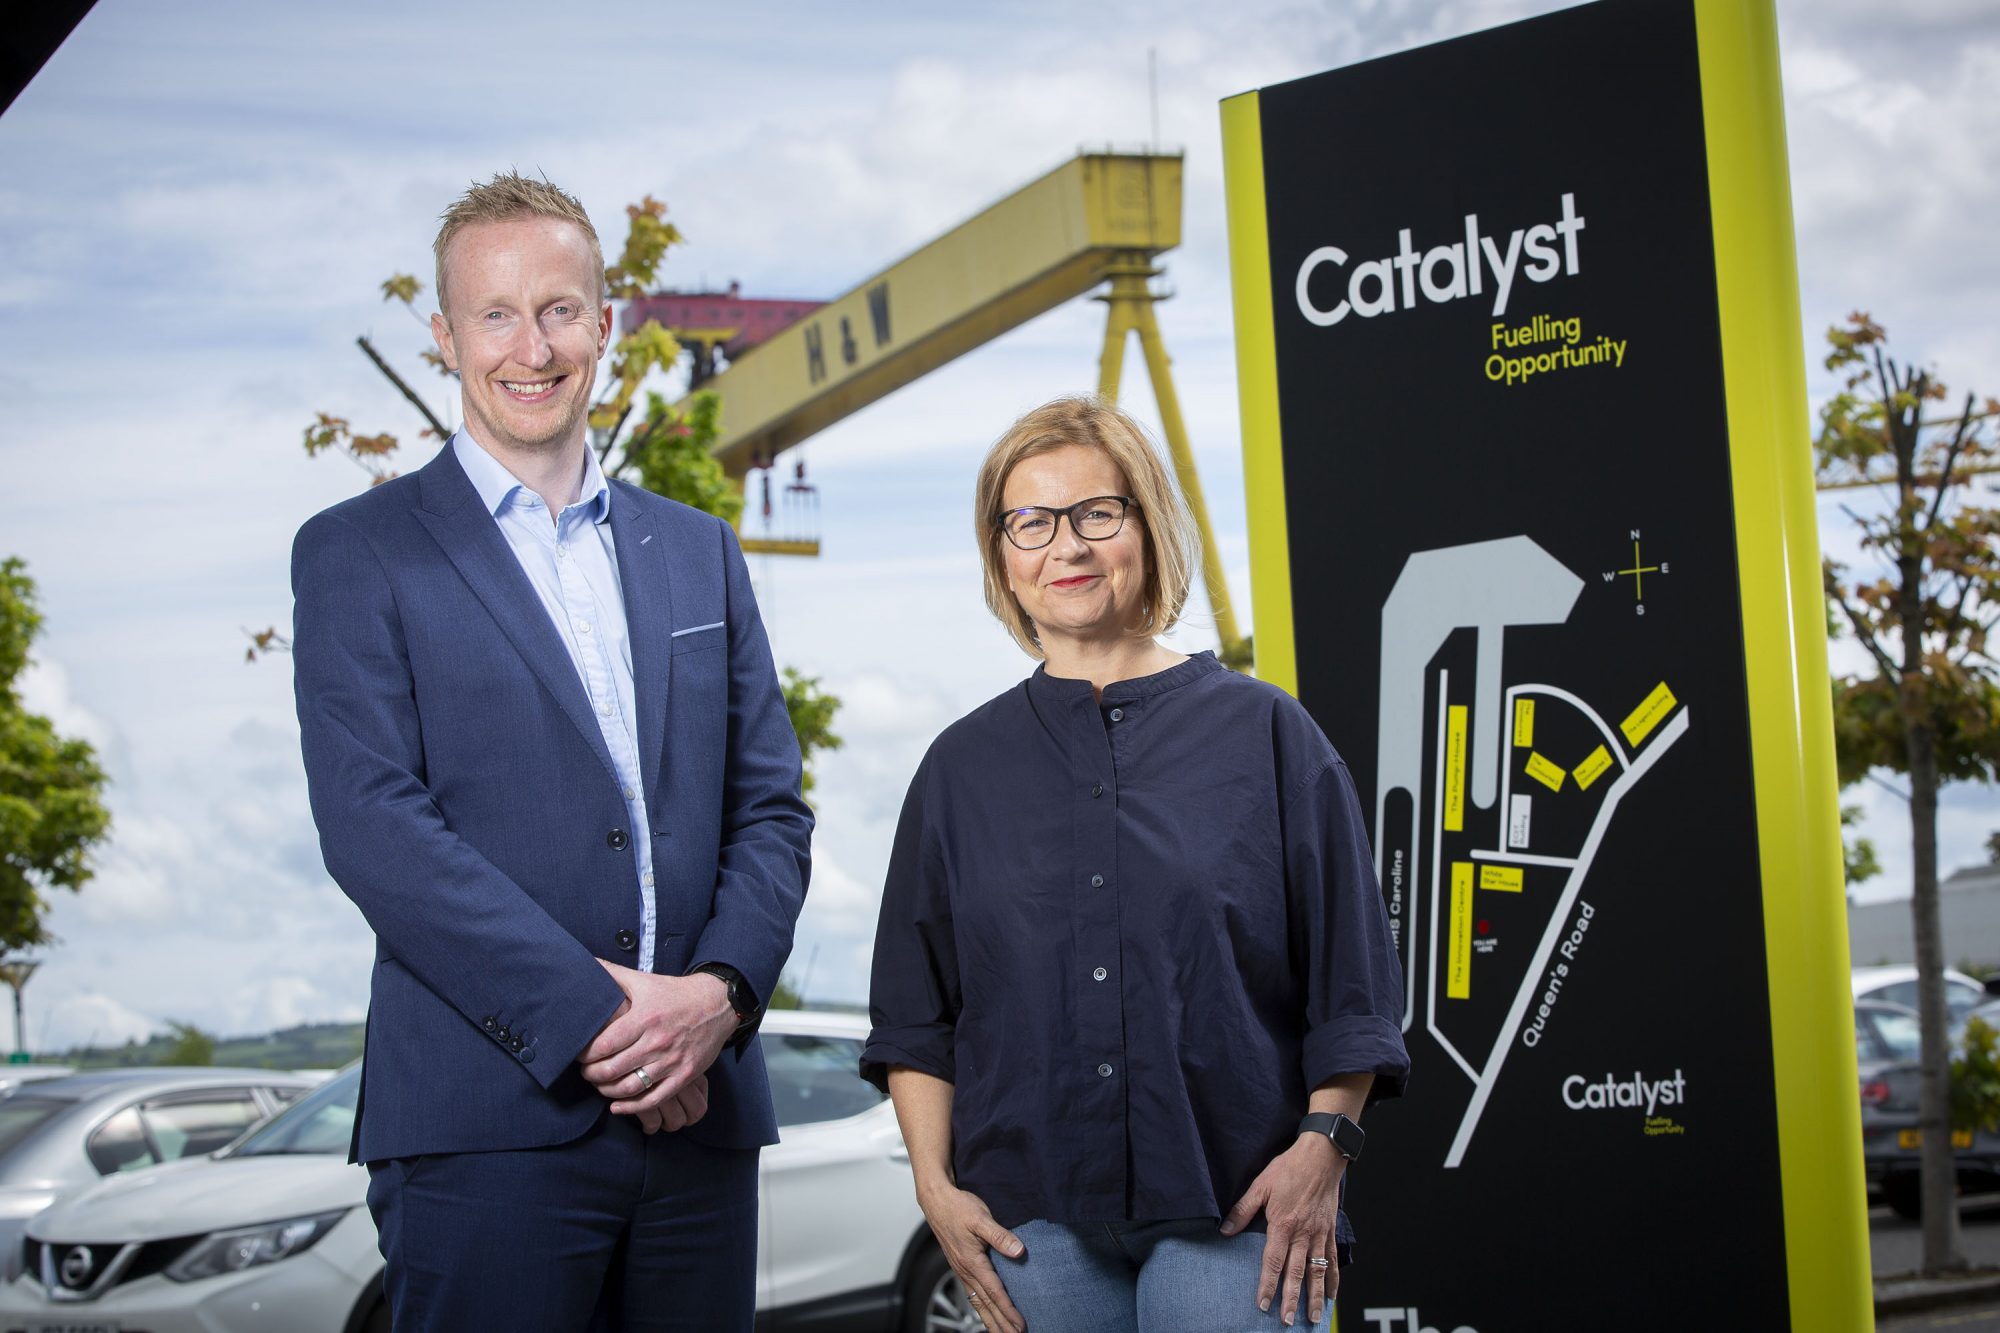 Elaine Smyth, Director of Innovation Community at Catalyst and Niall Devlin, Head of Business Banking NI at Bank of Ireland UK launch the 2022 INVENT Awards.